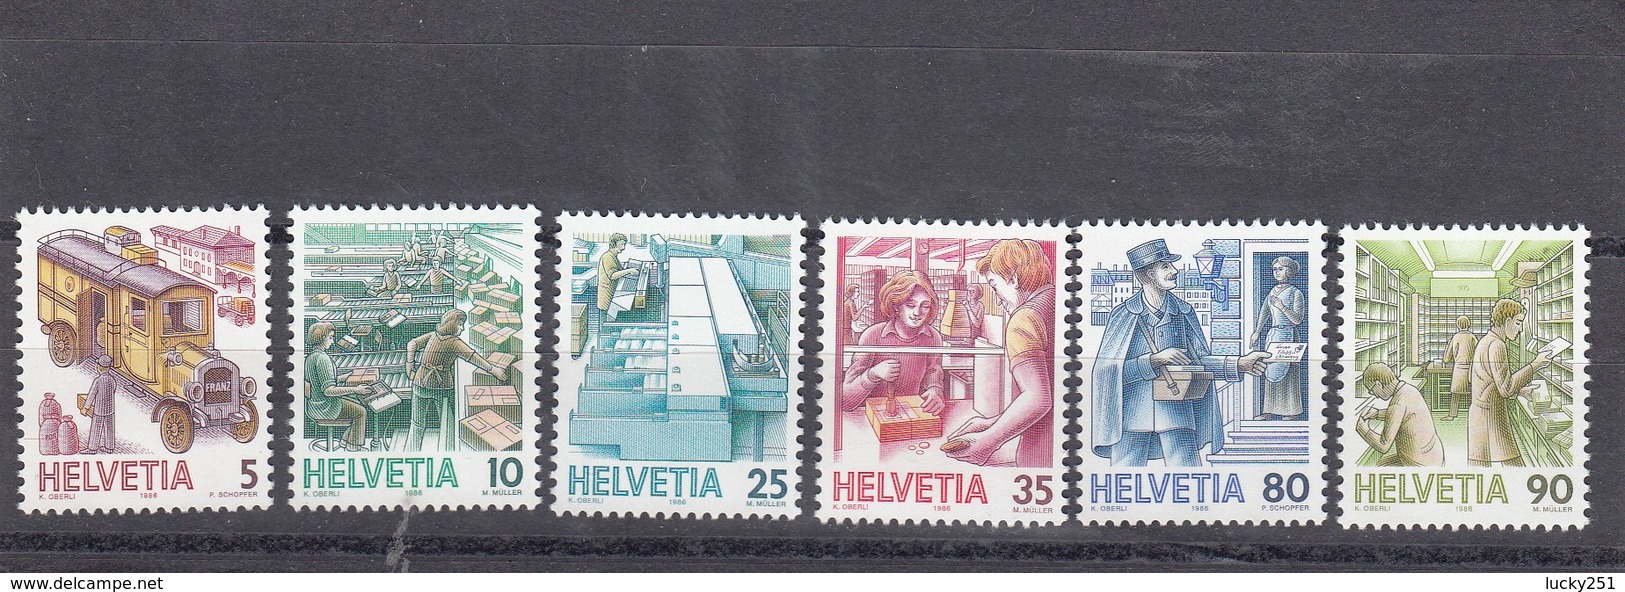 Suisse - Neuf** - Série Courante - Année 1986 - YT 1250/55 - Unused Stamps